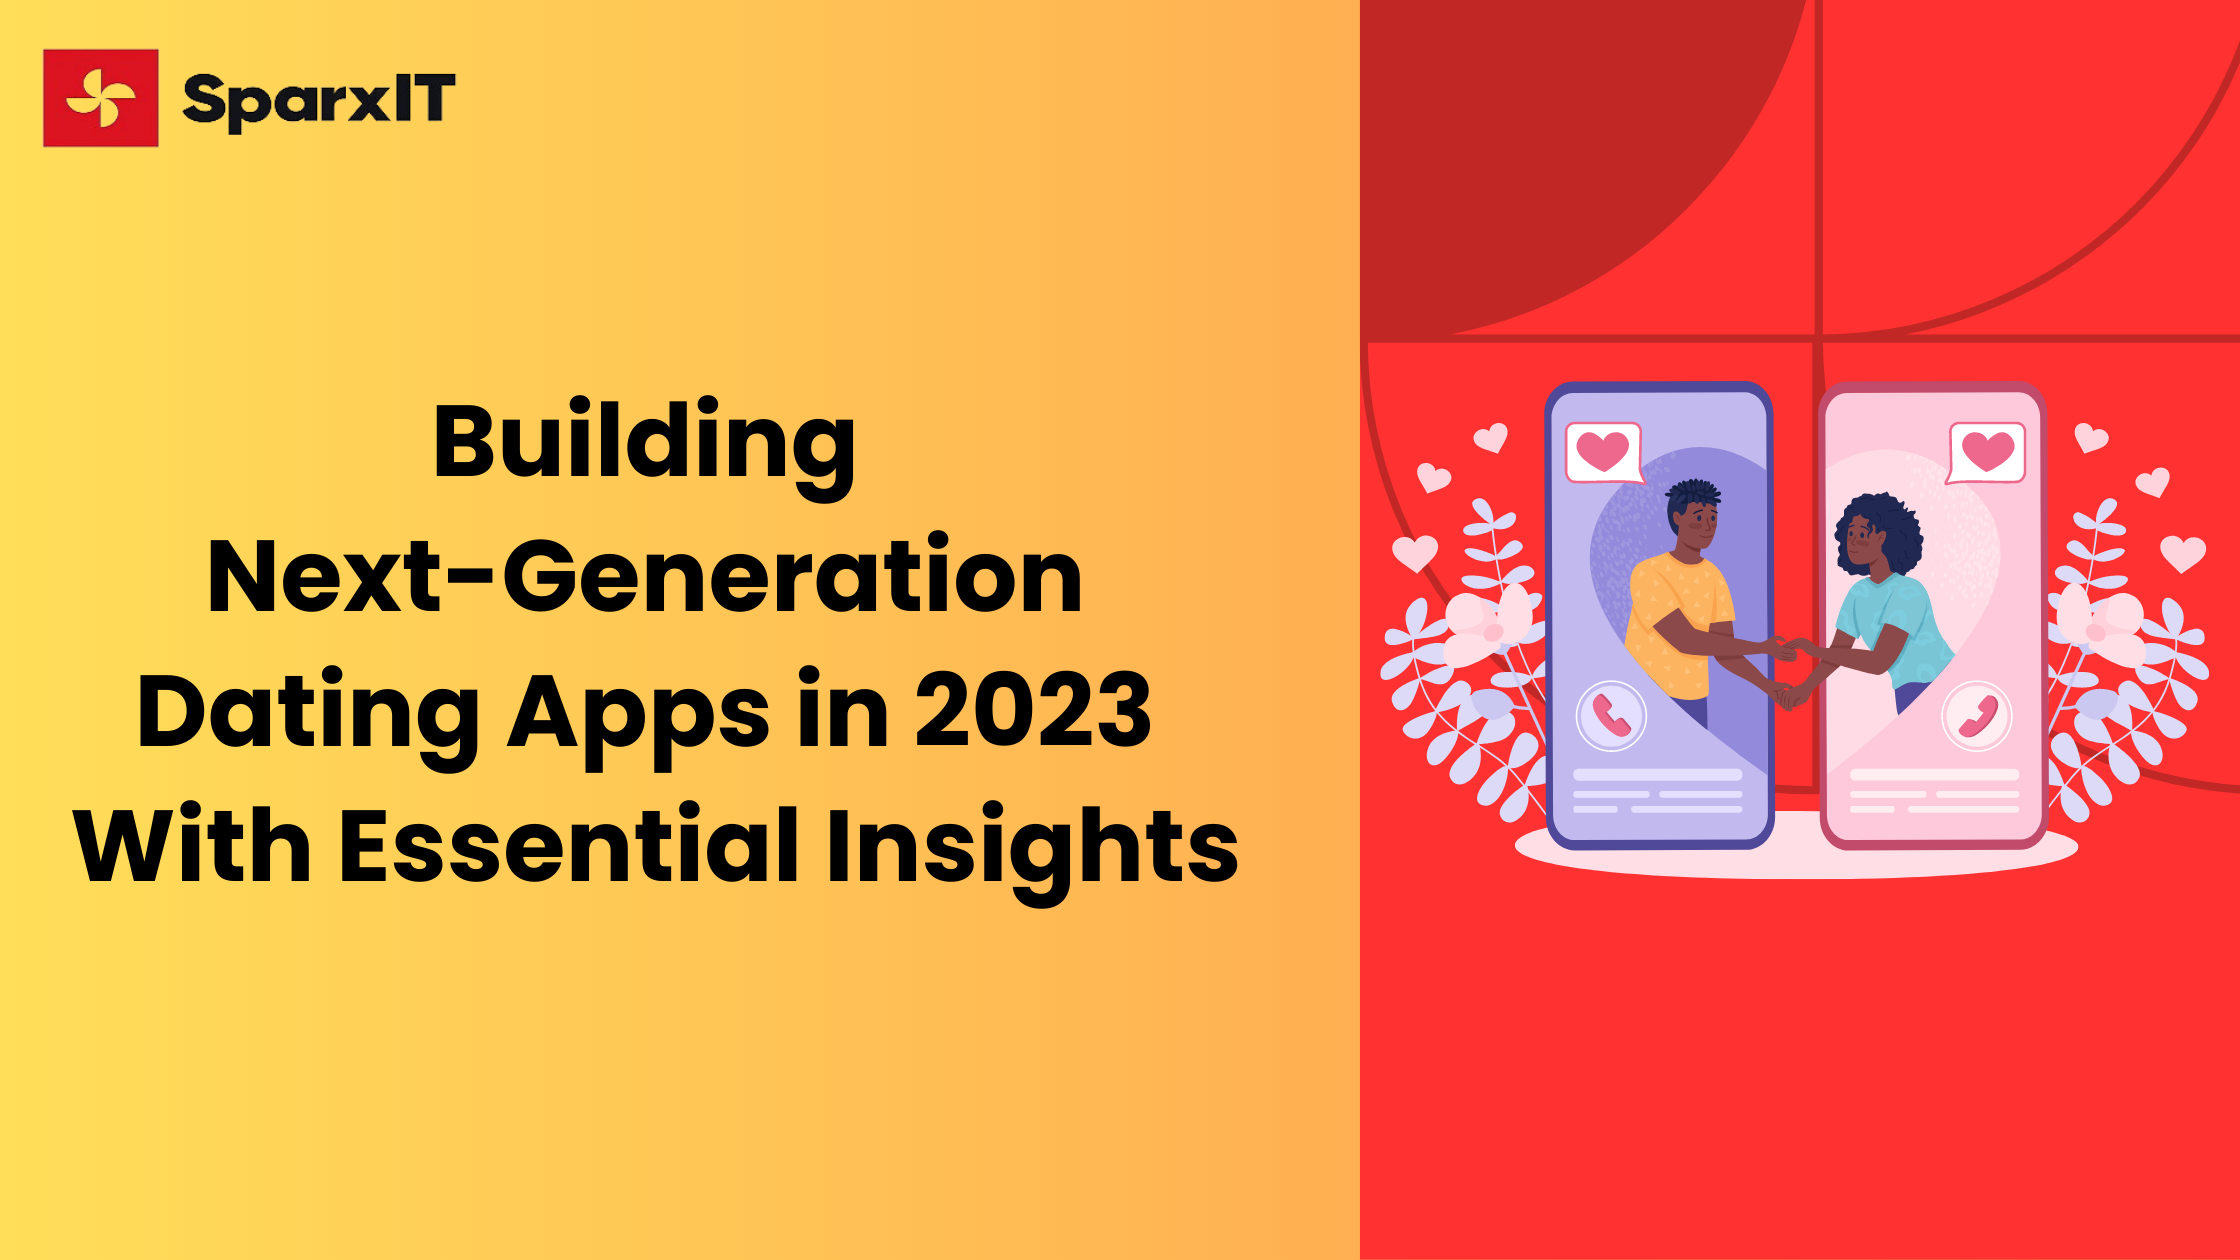 Building Next-Generation Dating Apps in 2023 With Essential Insights